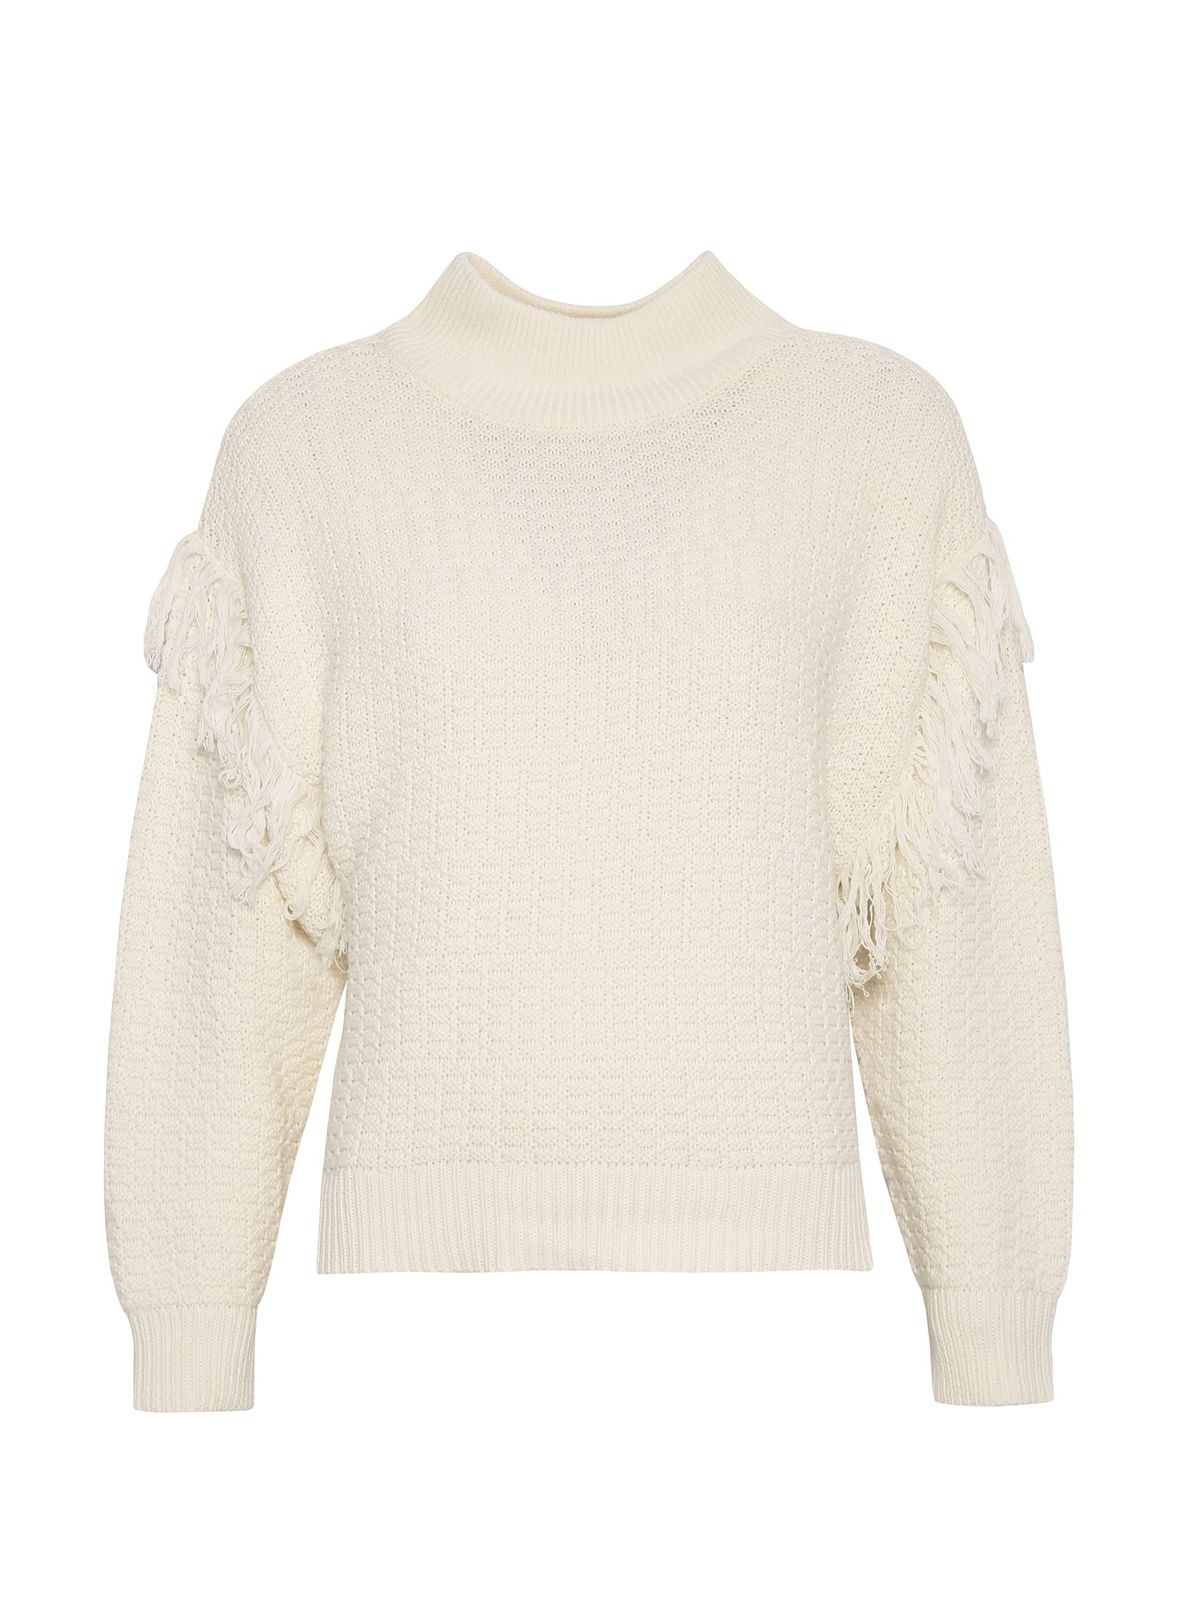 Cream sweater knitted high collar with fringes 6 - StarShinerS.com